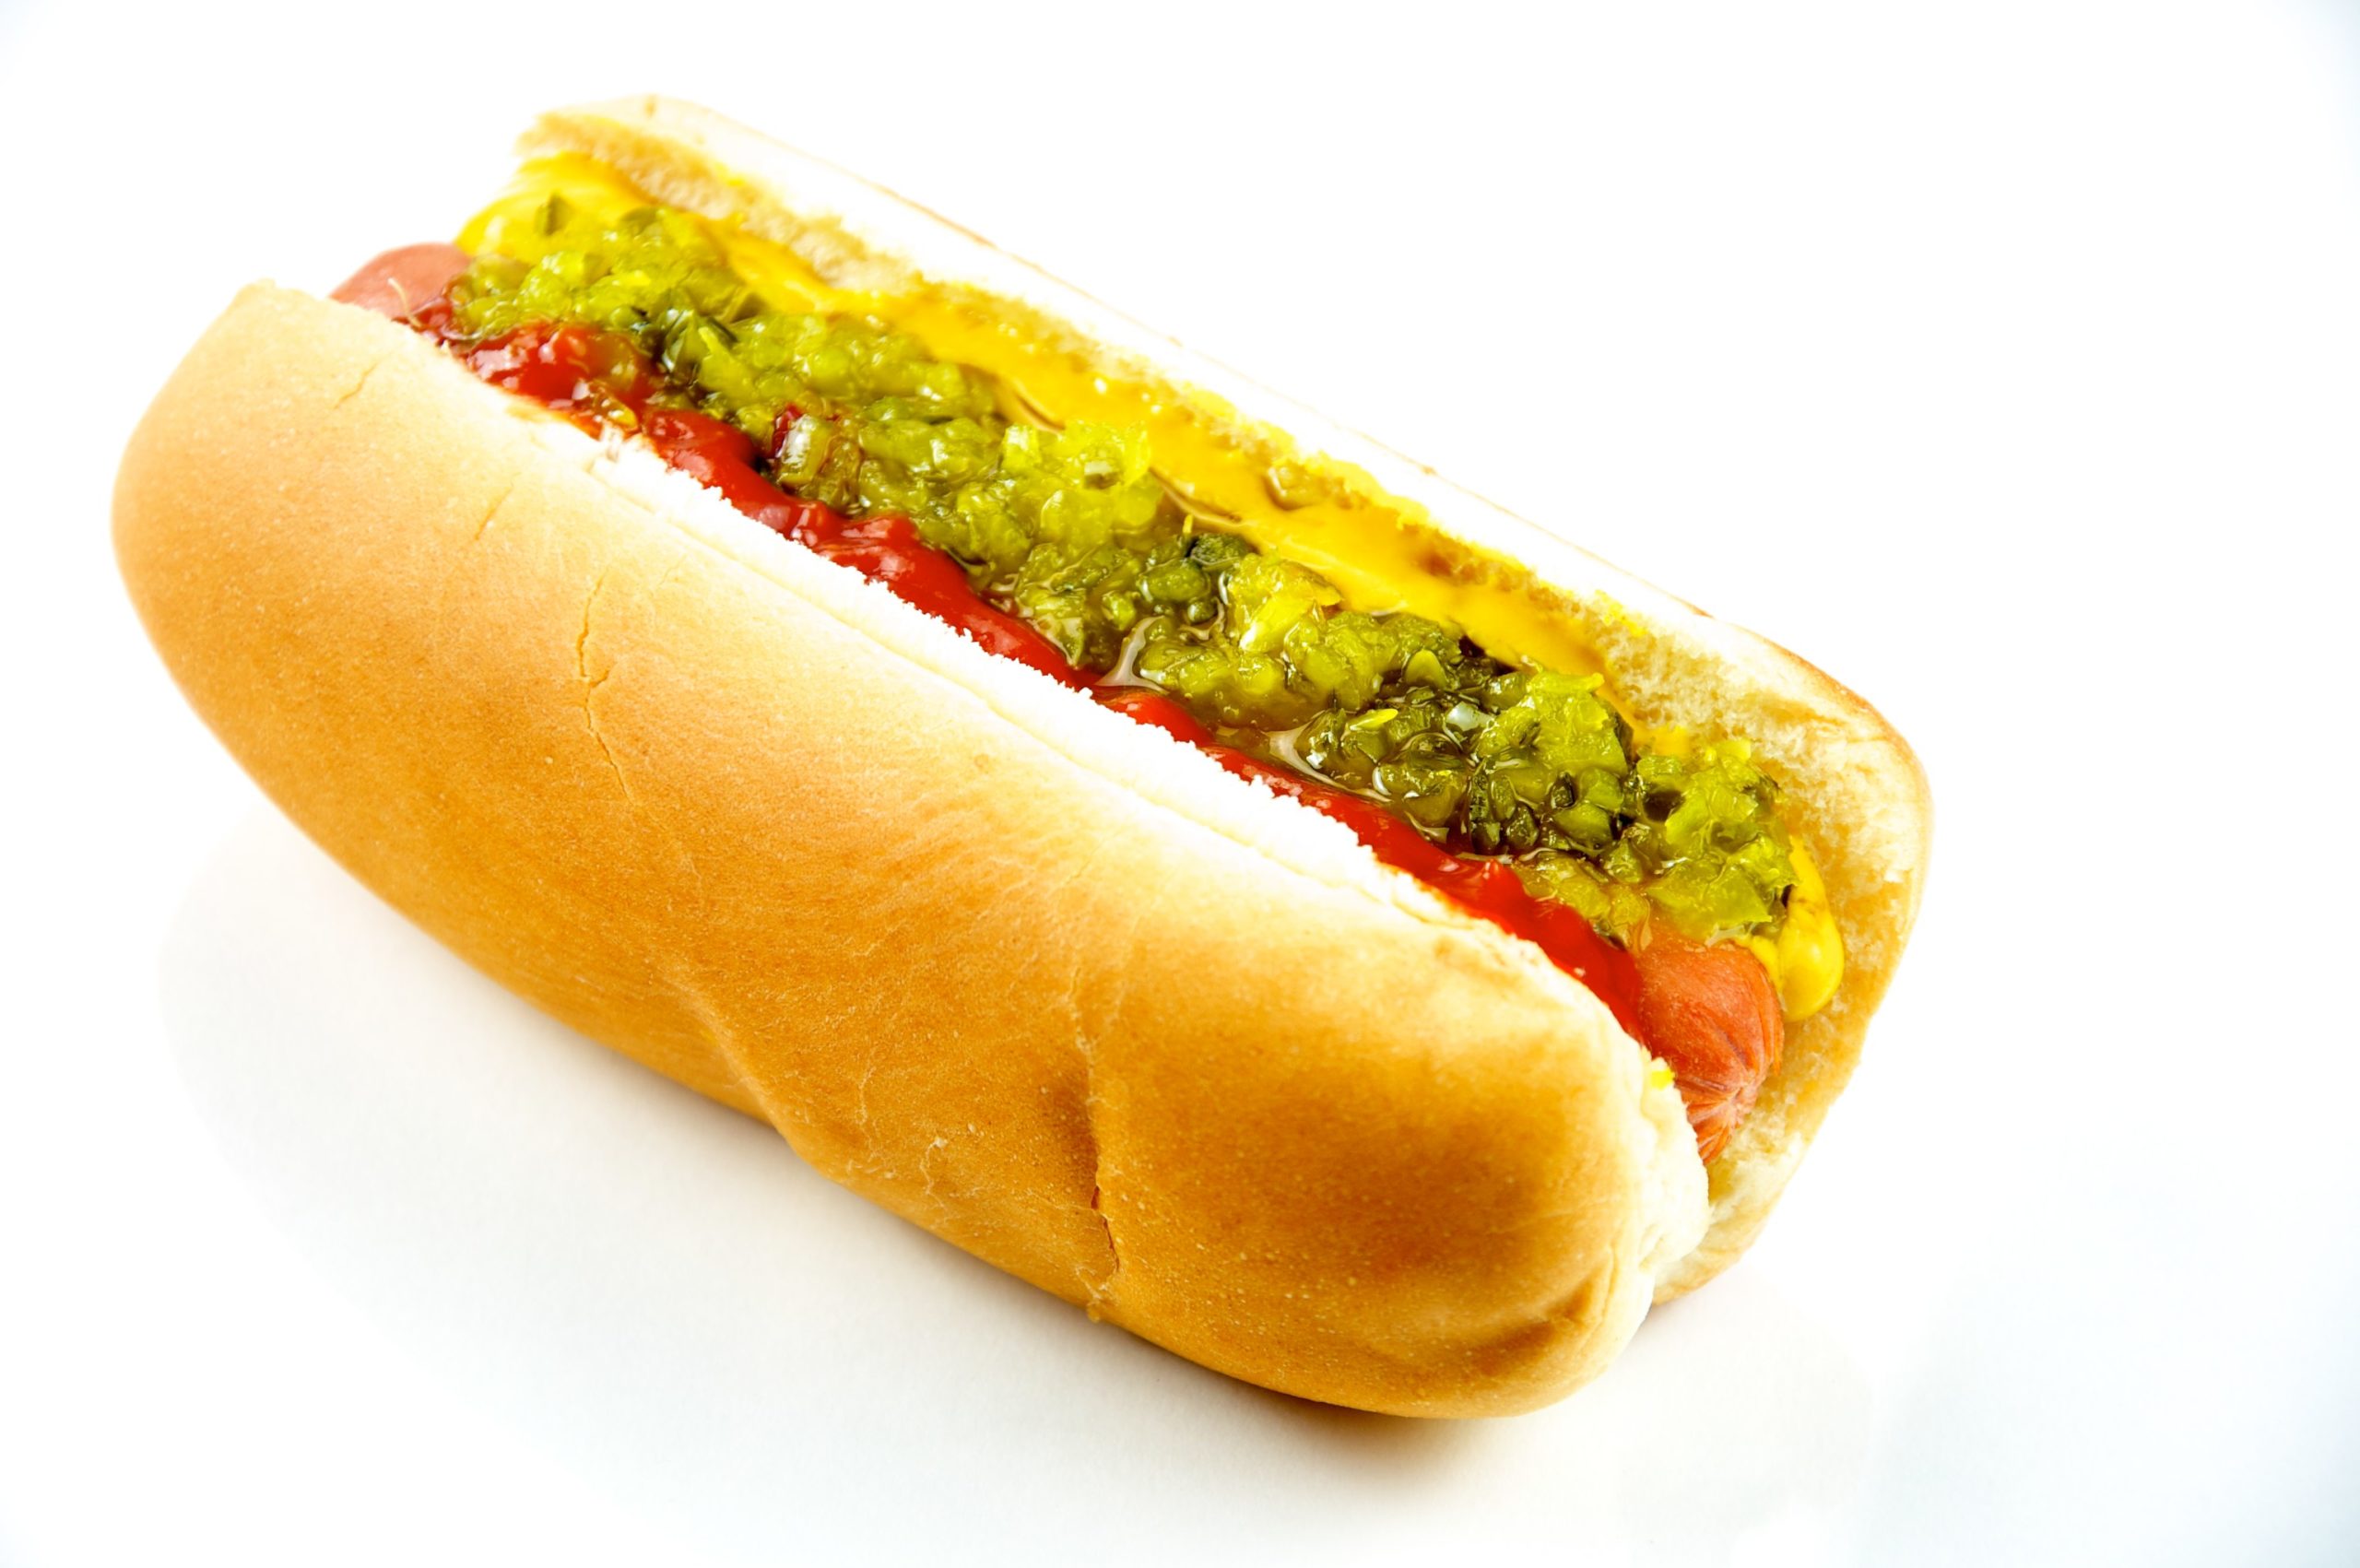 Hot dogs can contain high levels of trans fats